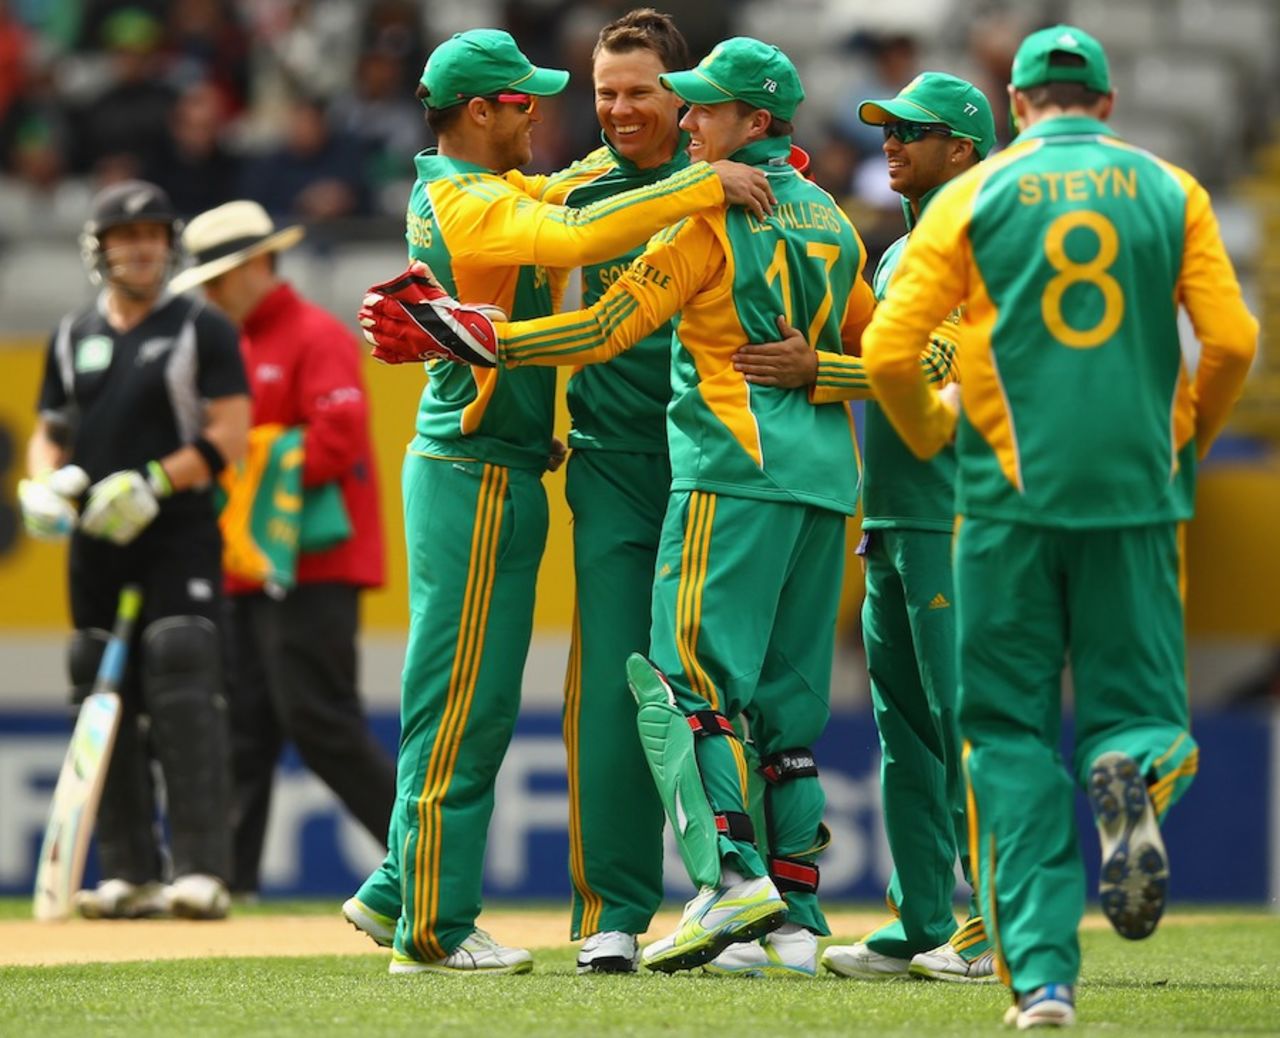 Johan Botha and his team-mates celebrate Rob Nicol's wicket, New Zealand v South Africa, 3rd ODI, Auckland, March 3, 2012